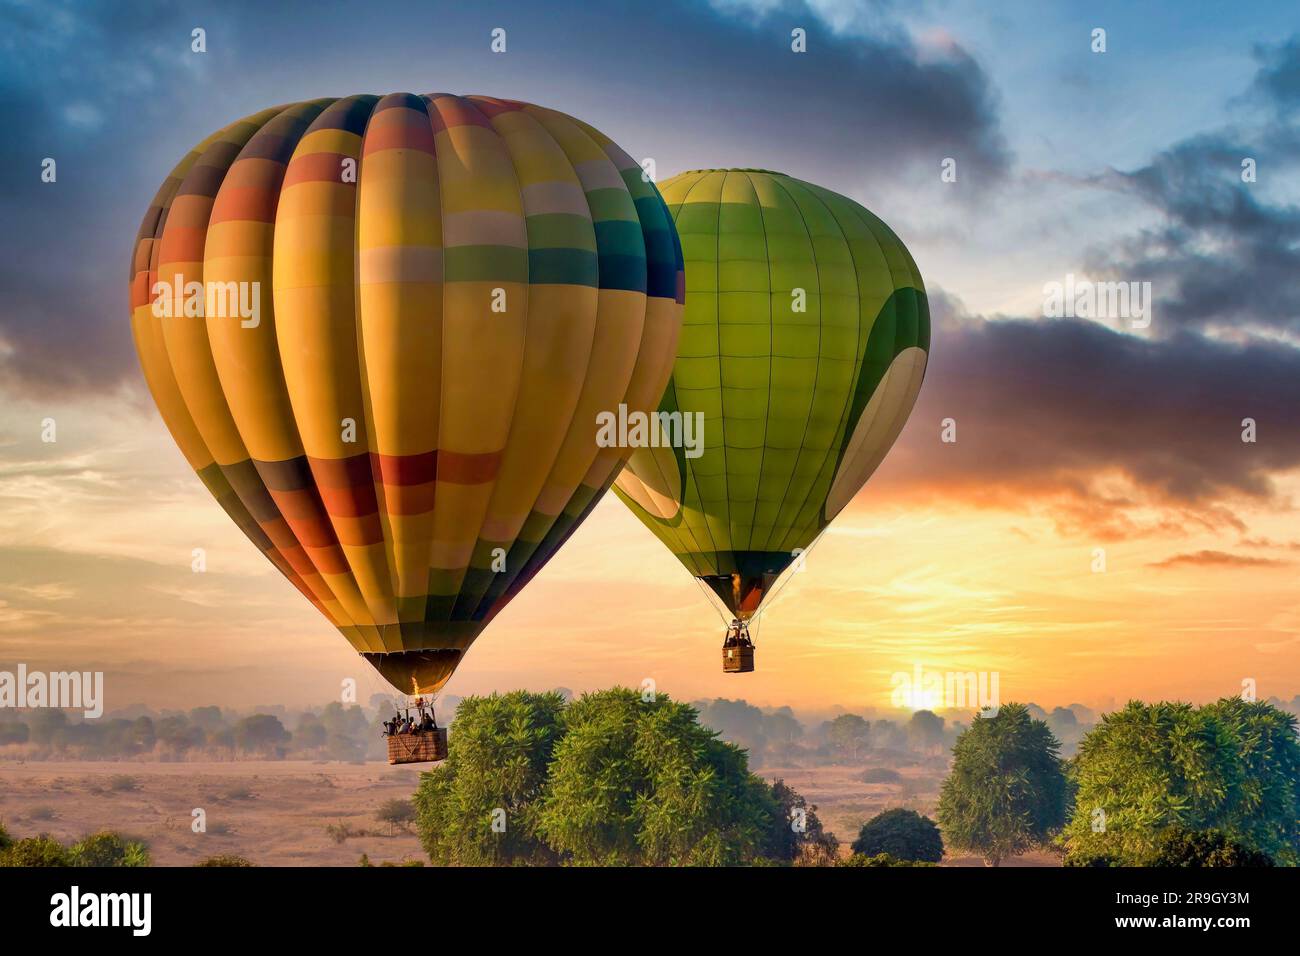 Two colorful hot air balloons filled with tourists float above the landscape at sunrise, part of the annual Pushkar Camel Fair in Rajasthan, India. Stock Photo